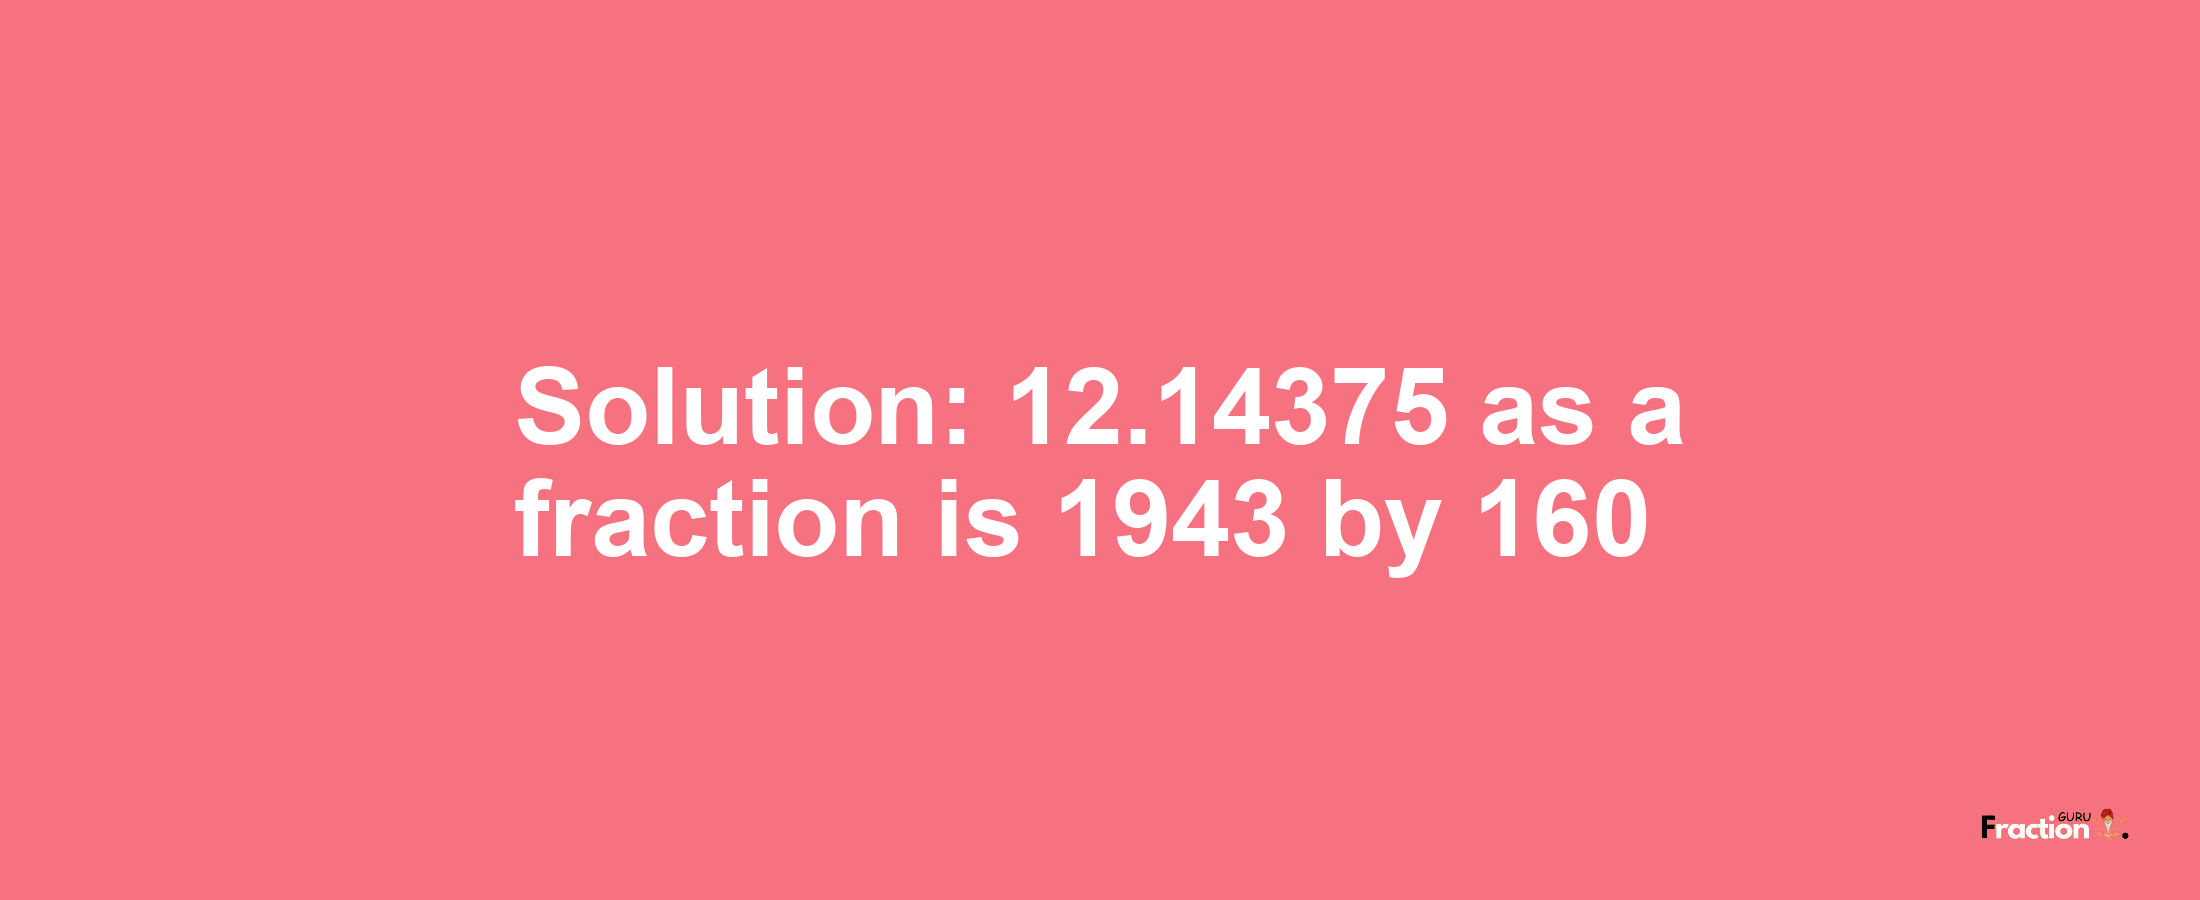 Solution:12.14375 as a fraction is 1943/160